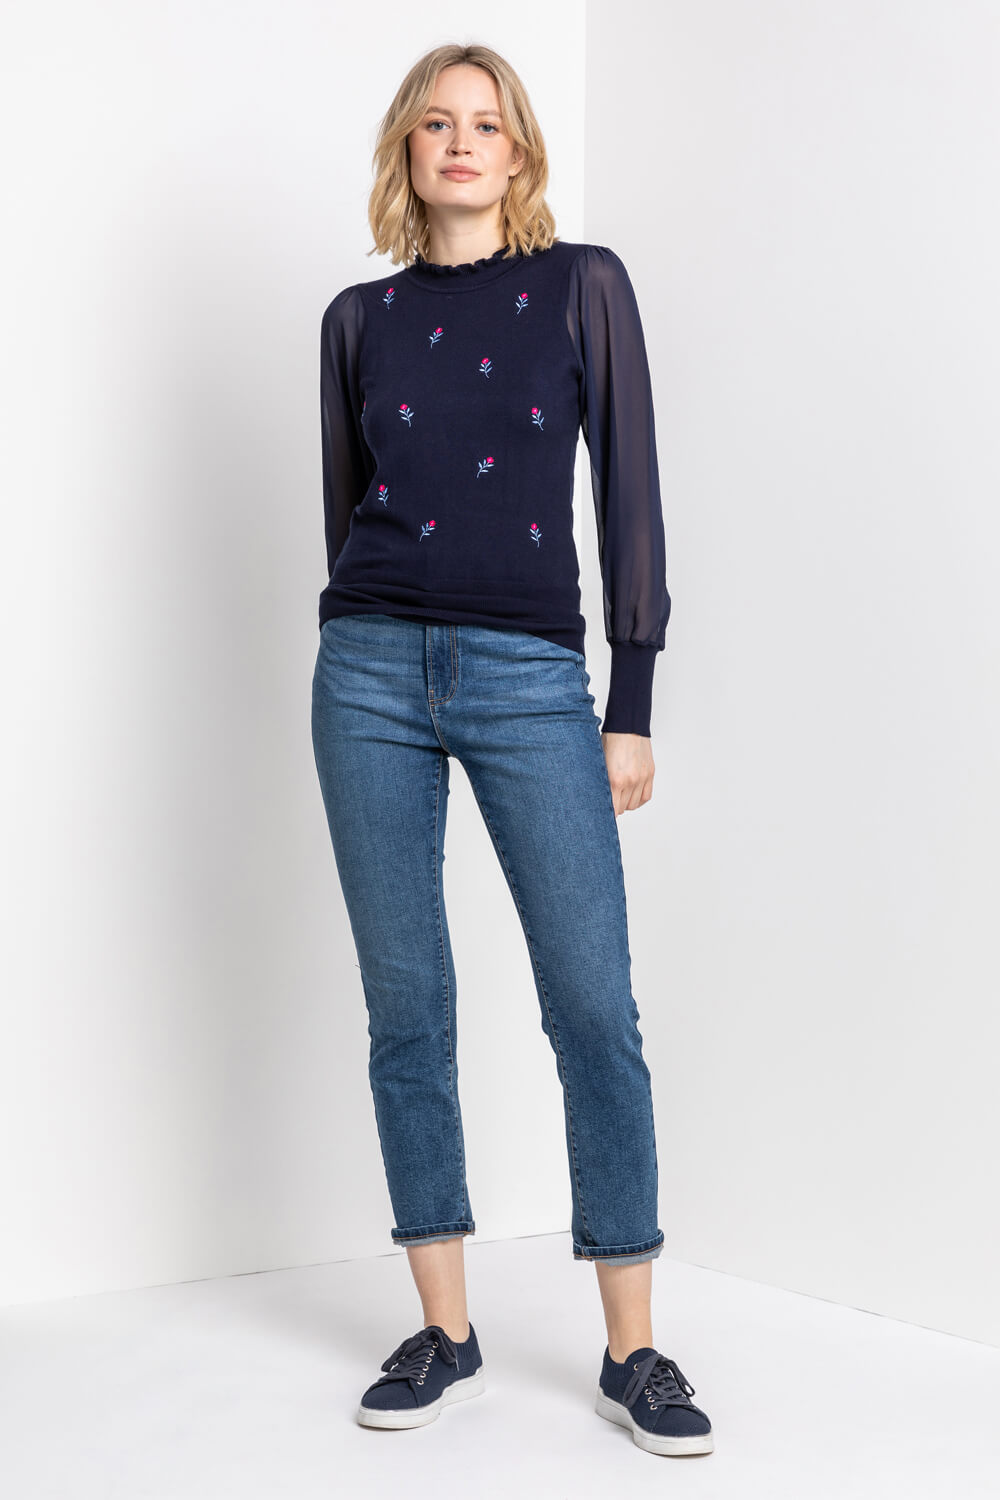 Midnight Blue Floral Embroidered Frill Neck Top, Image 3 of 5